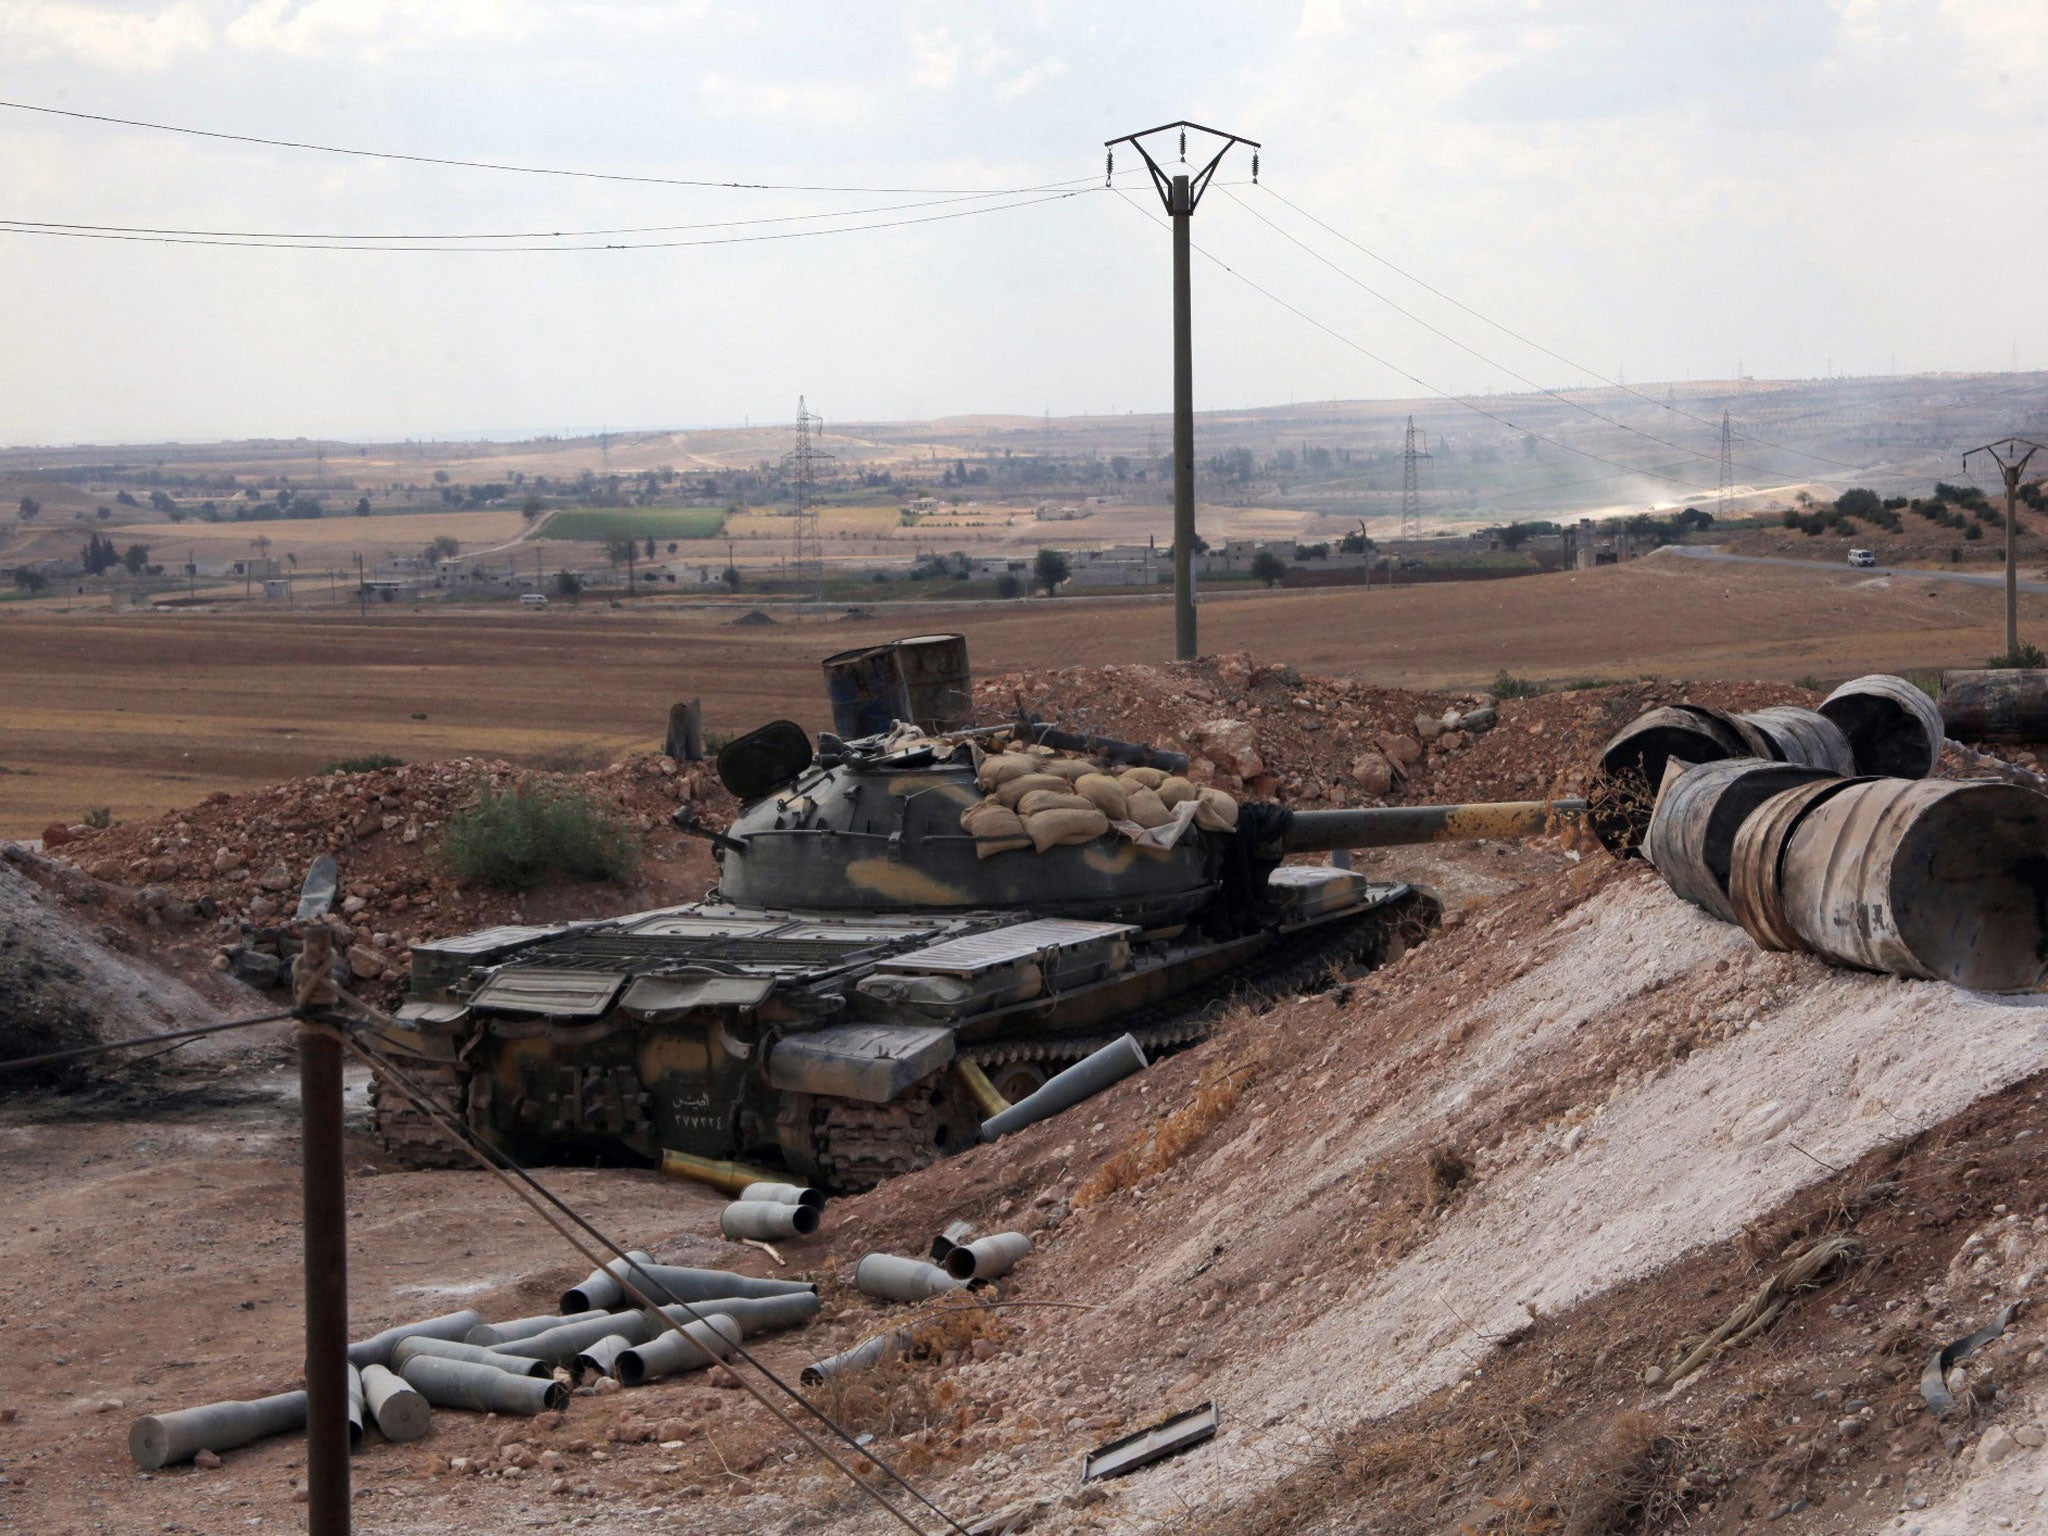 A Syrian army tank on the southern outskirts of Aleppo, one of the areas crucial to the success of the ceasefire